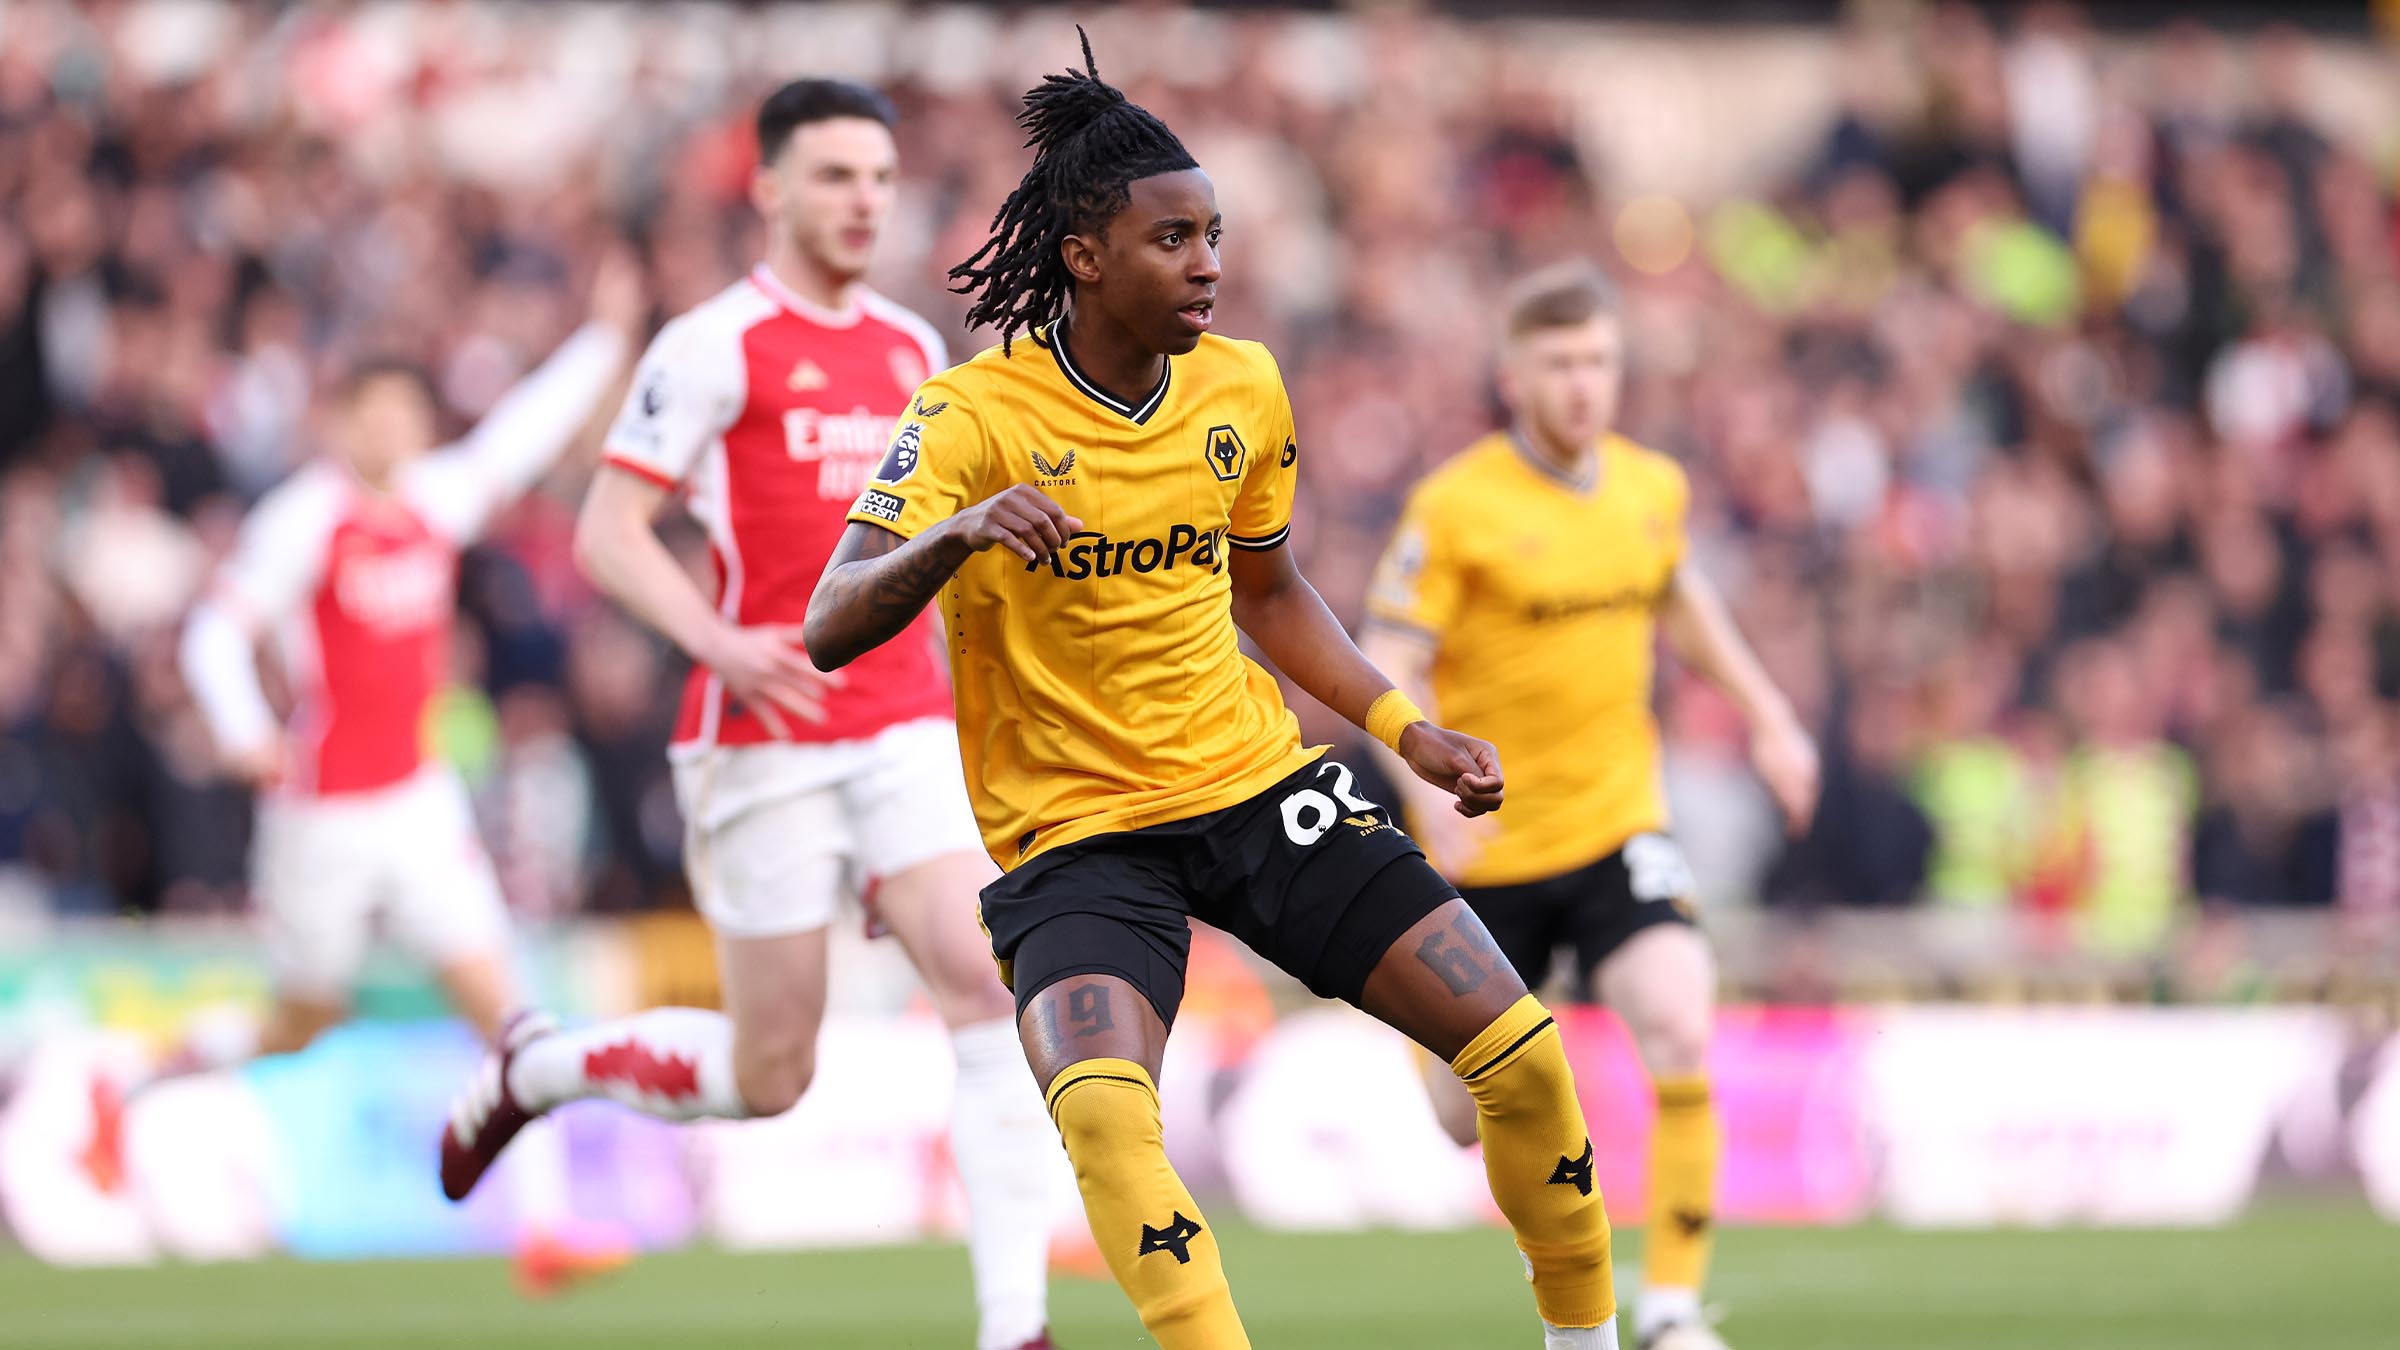 Tawanda Chirewa could be set for greater role at Wolves after major hint during pre-season